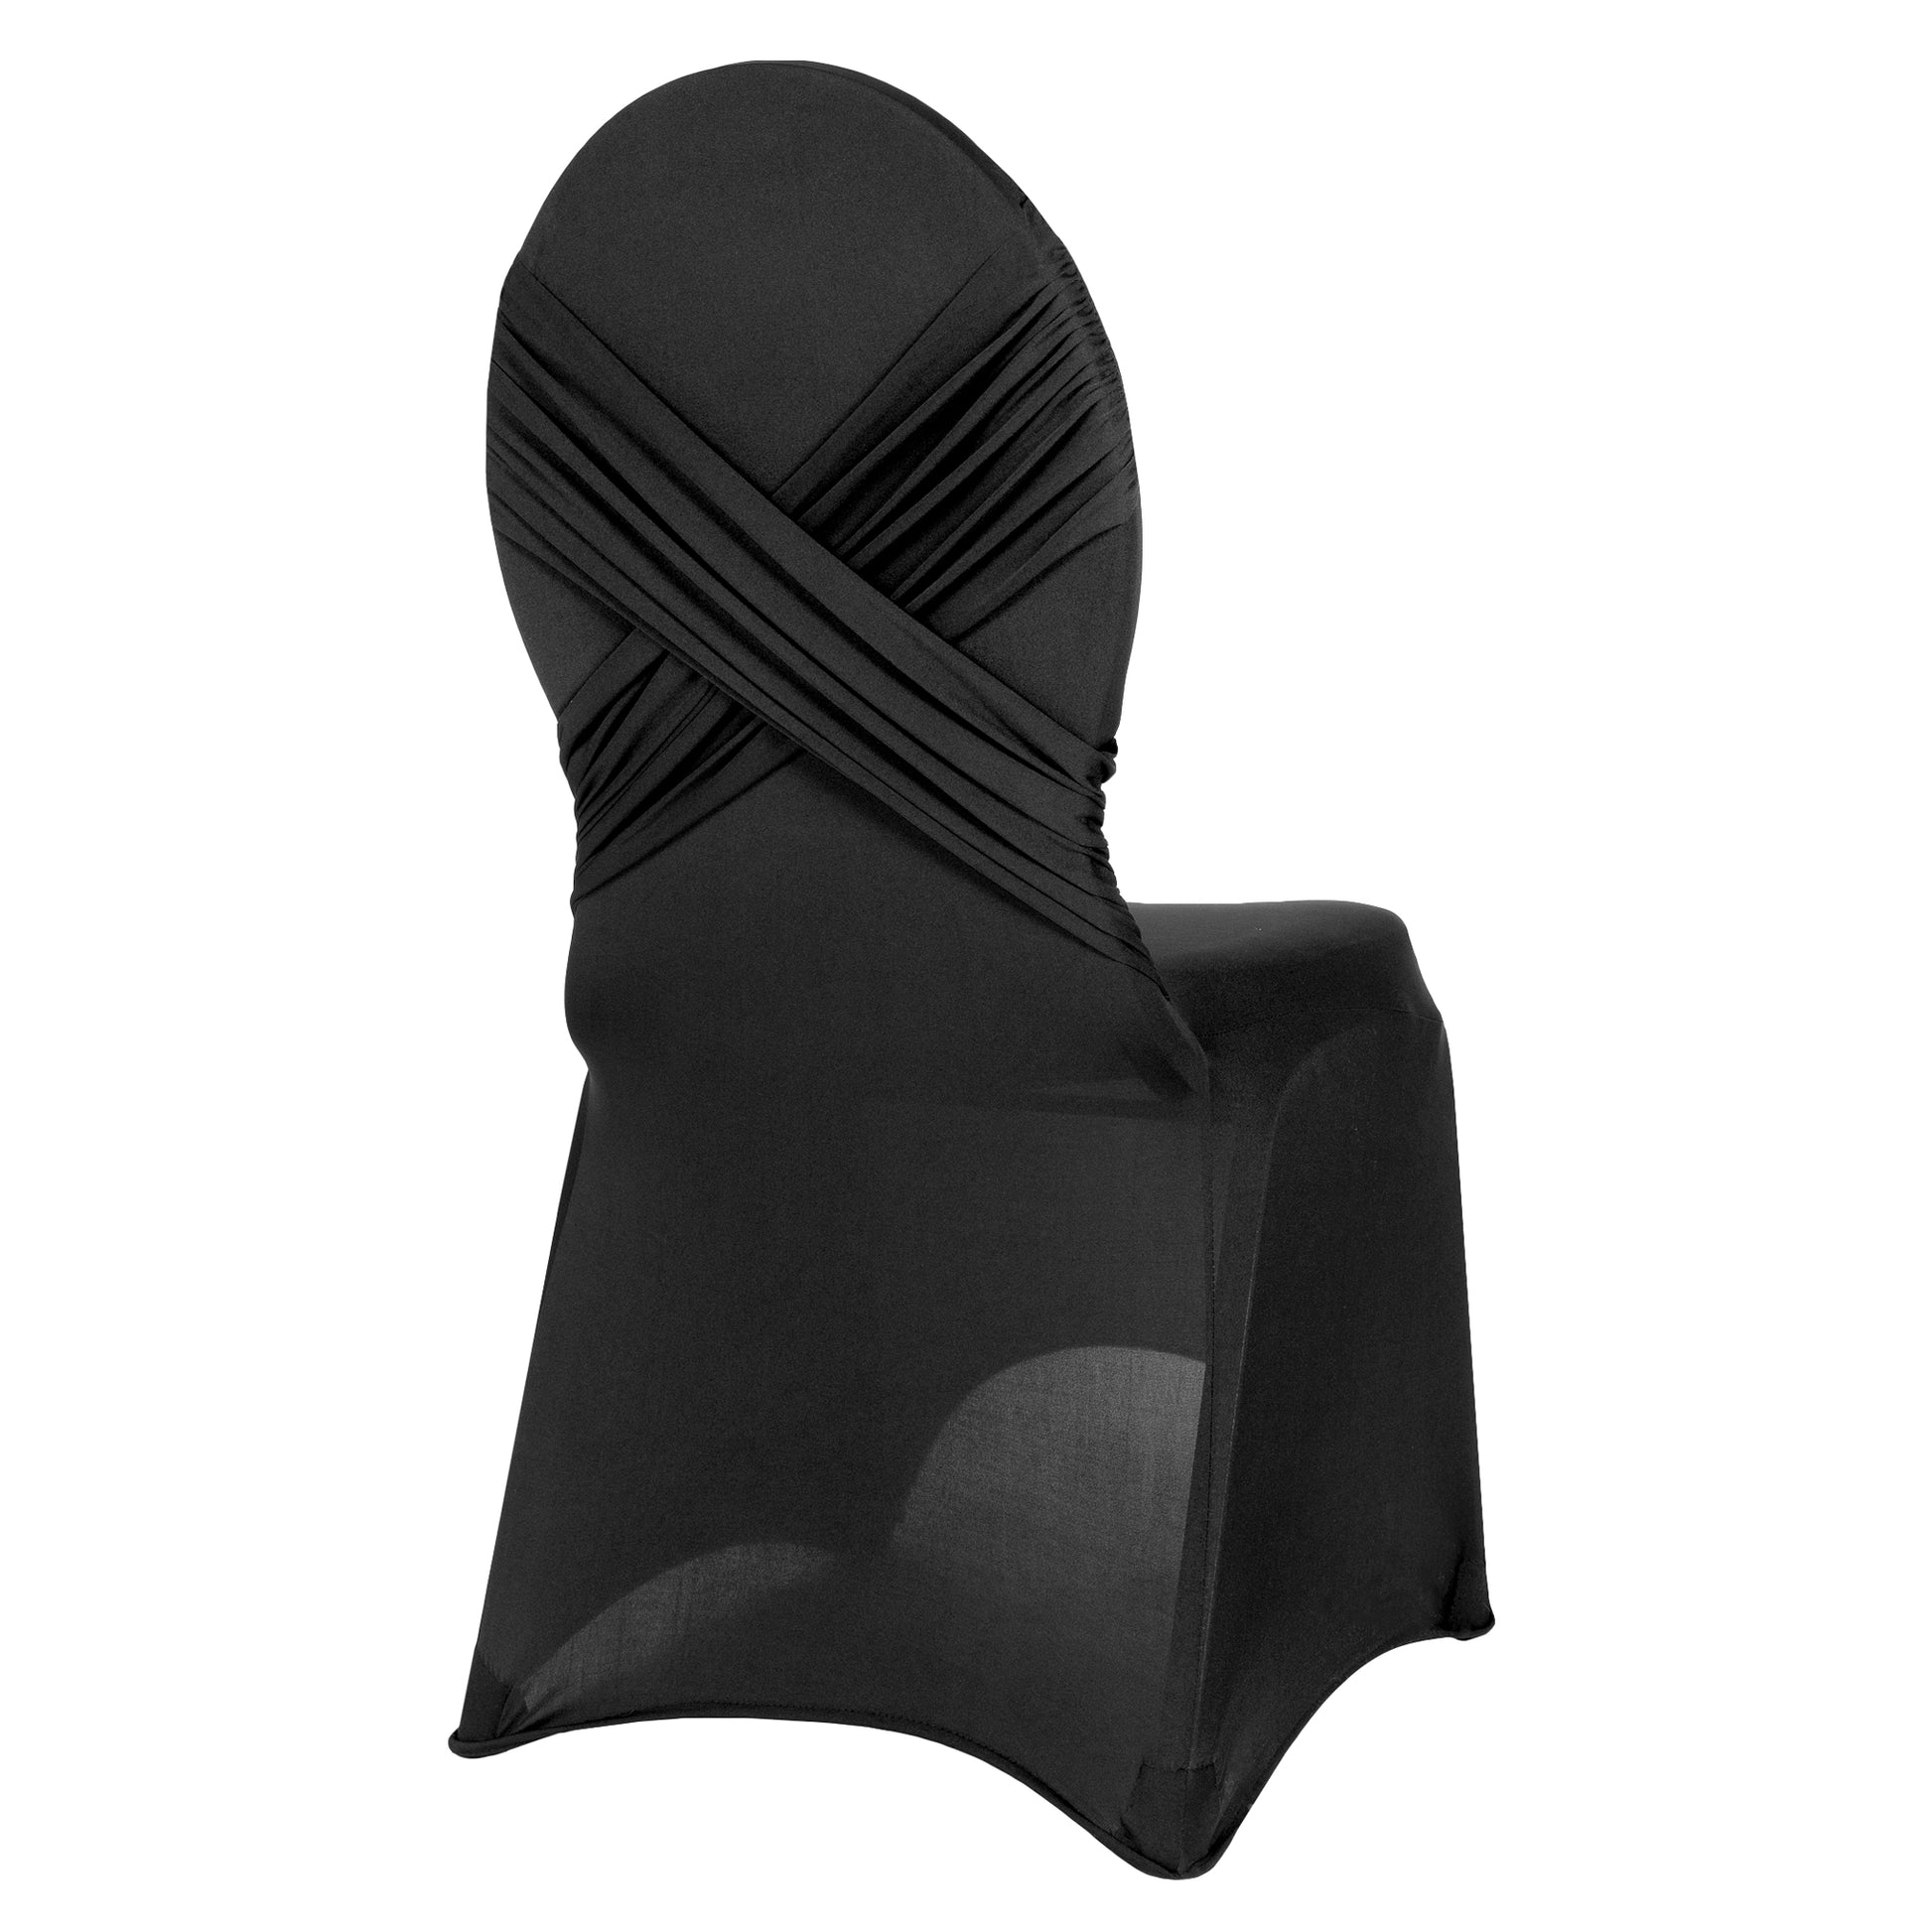 Stretch Spandex Folding Chair Cover Black - Your Chair Covers Inc.